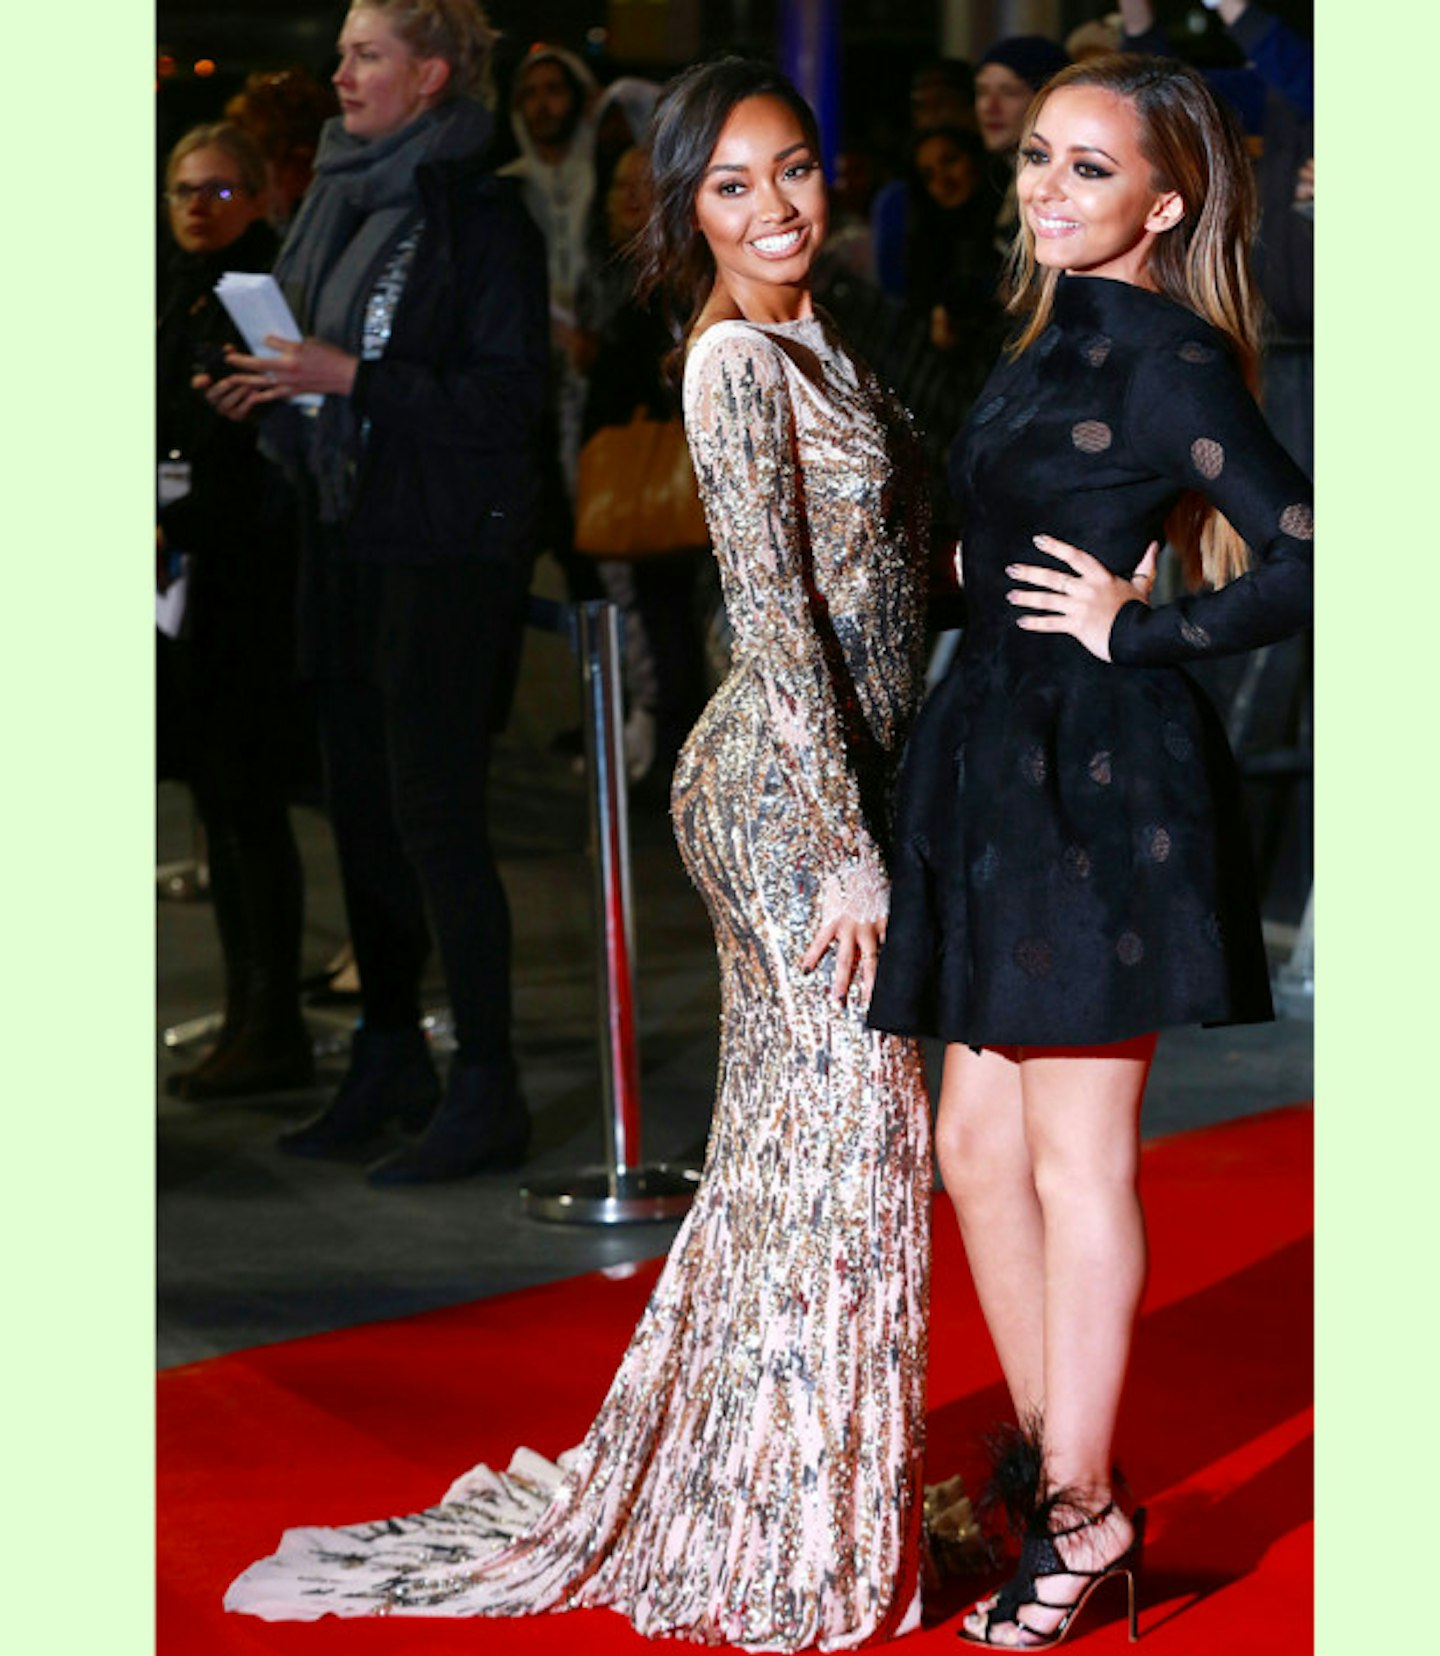 mobo-awards-little-mix-jade-thirlwall-leigh-anne-pinnock-sparkly-dress-black-spotty-dress